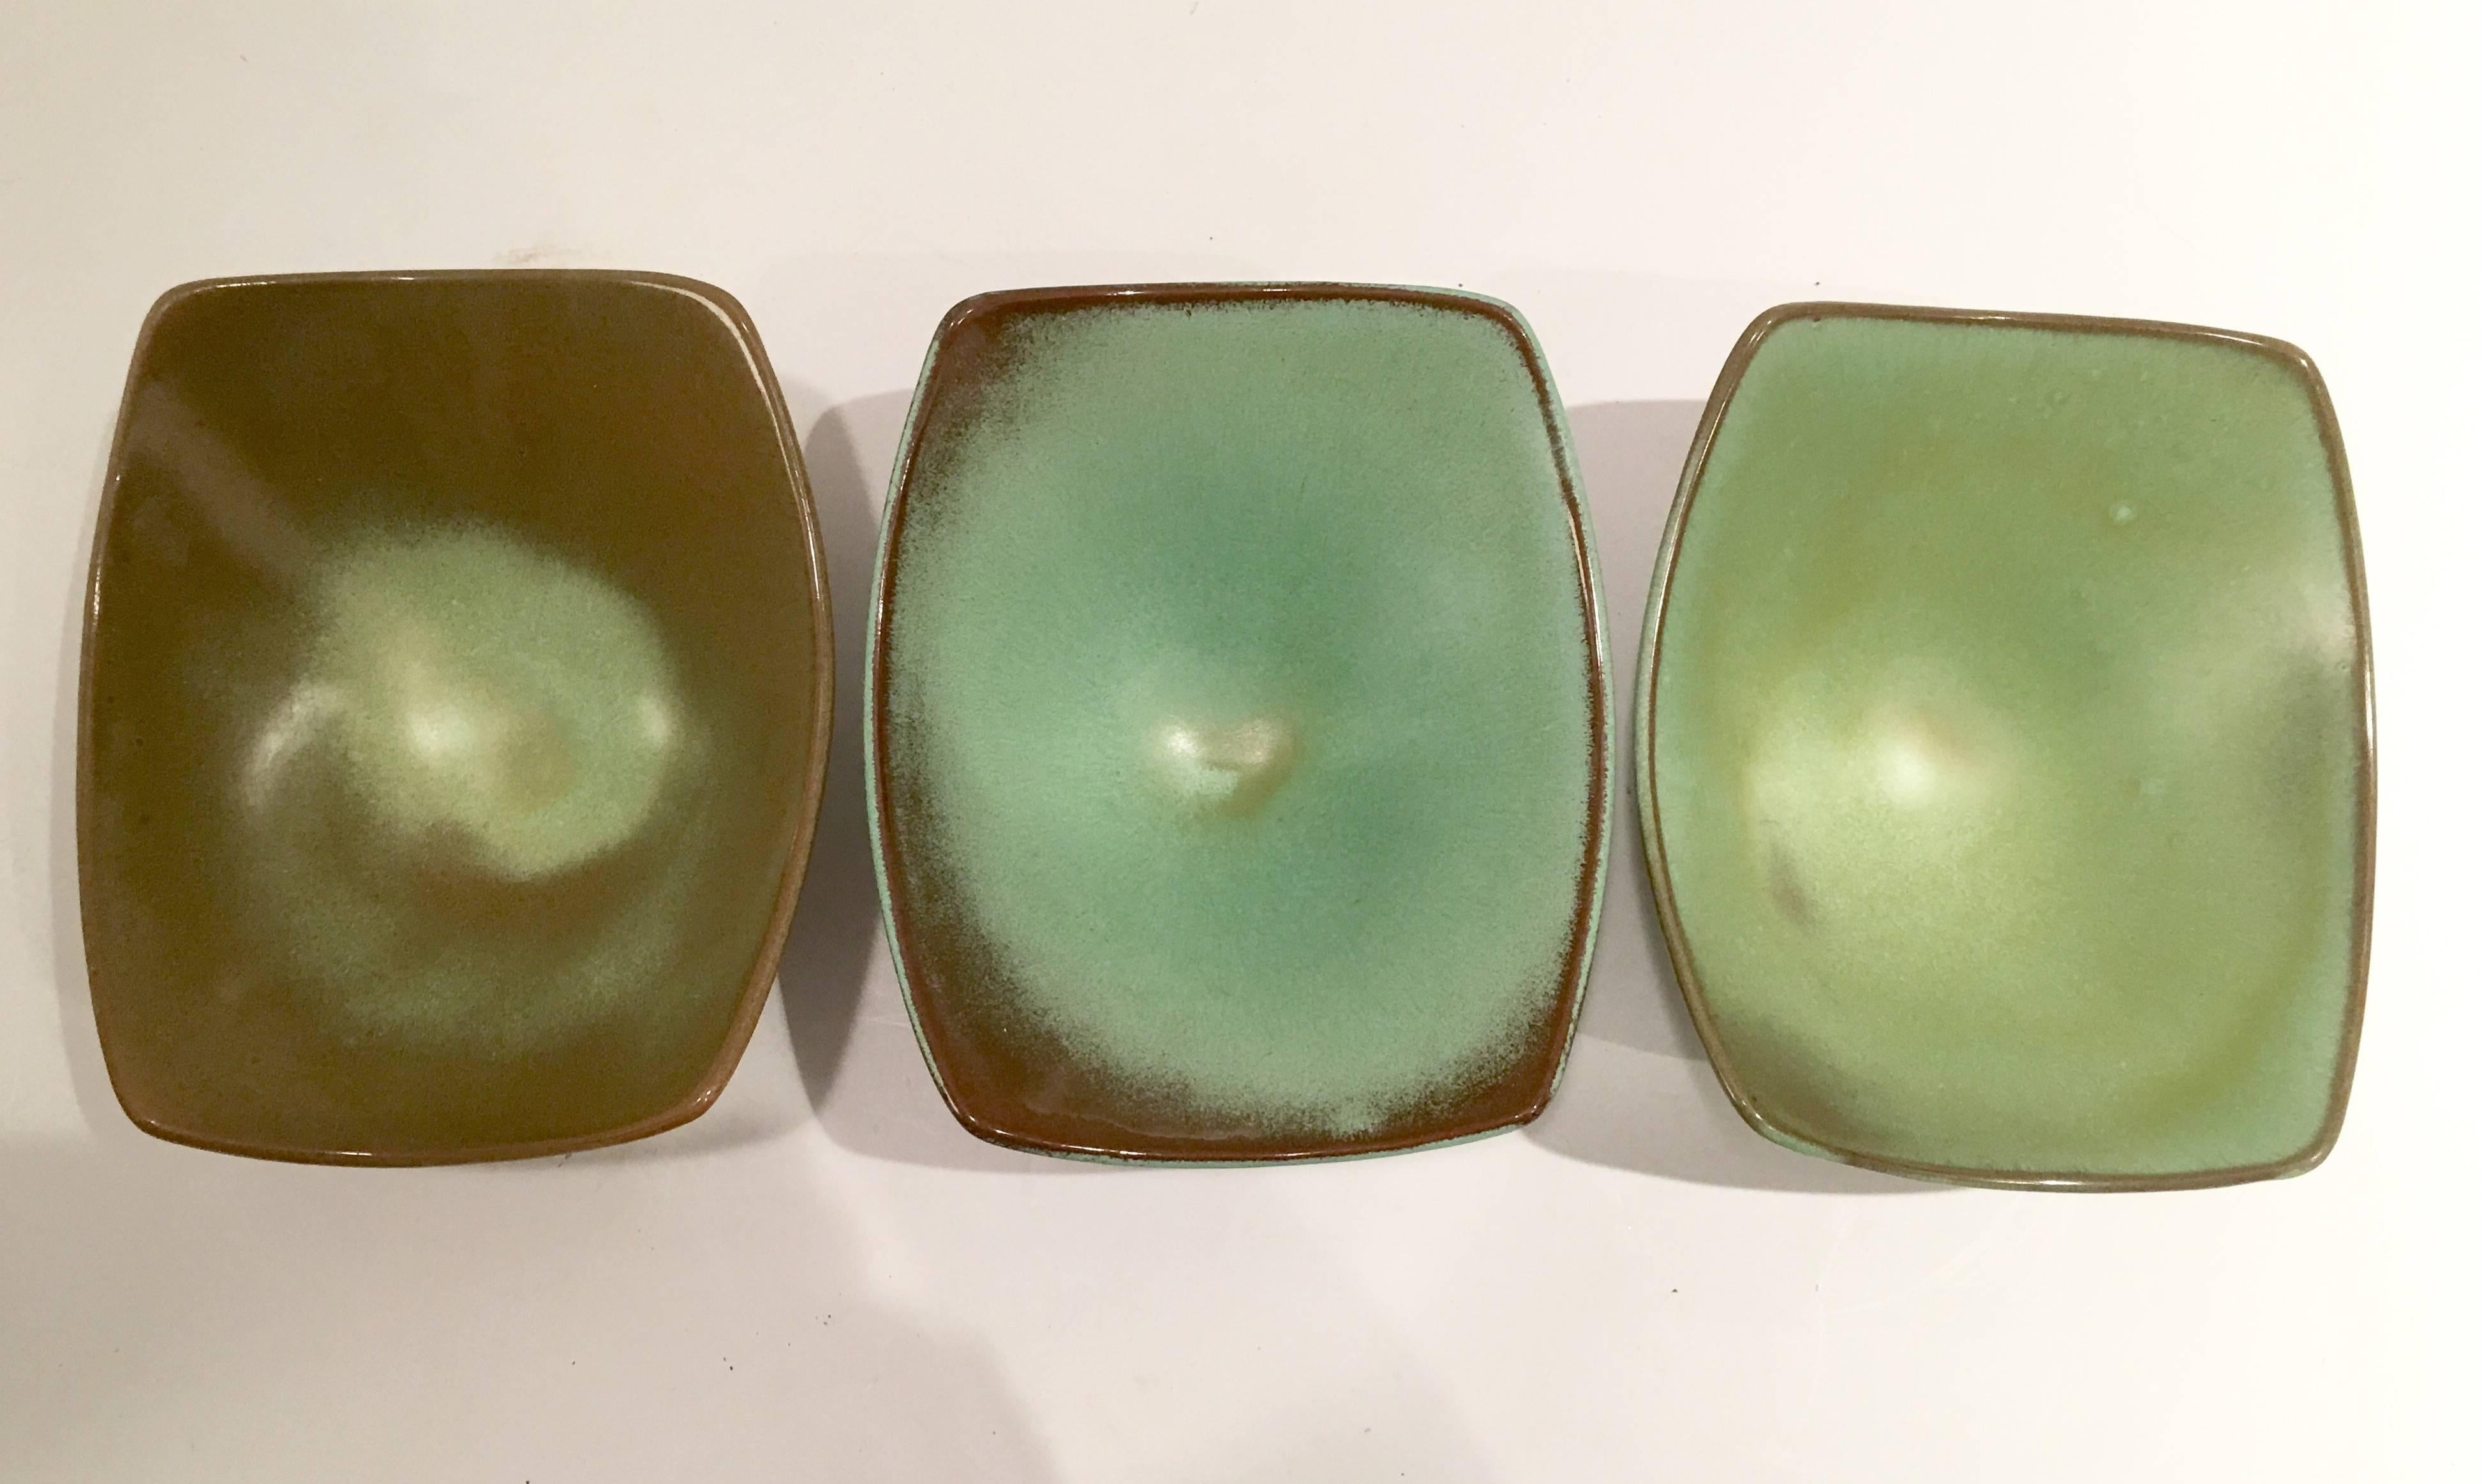 1950s Frankoma Pottery green five-piece serving piece set. Set includes, three square serving bowls, one oval serving platter and one leaf serving platter. 
Each bowl measures, 3.75" H x 7.75" L x 5" depth. The leaf tray measures,